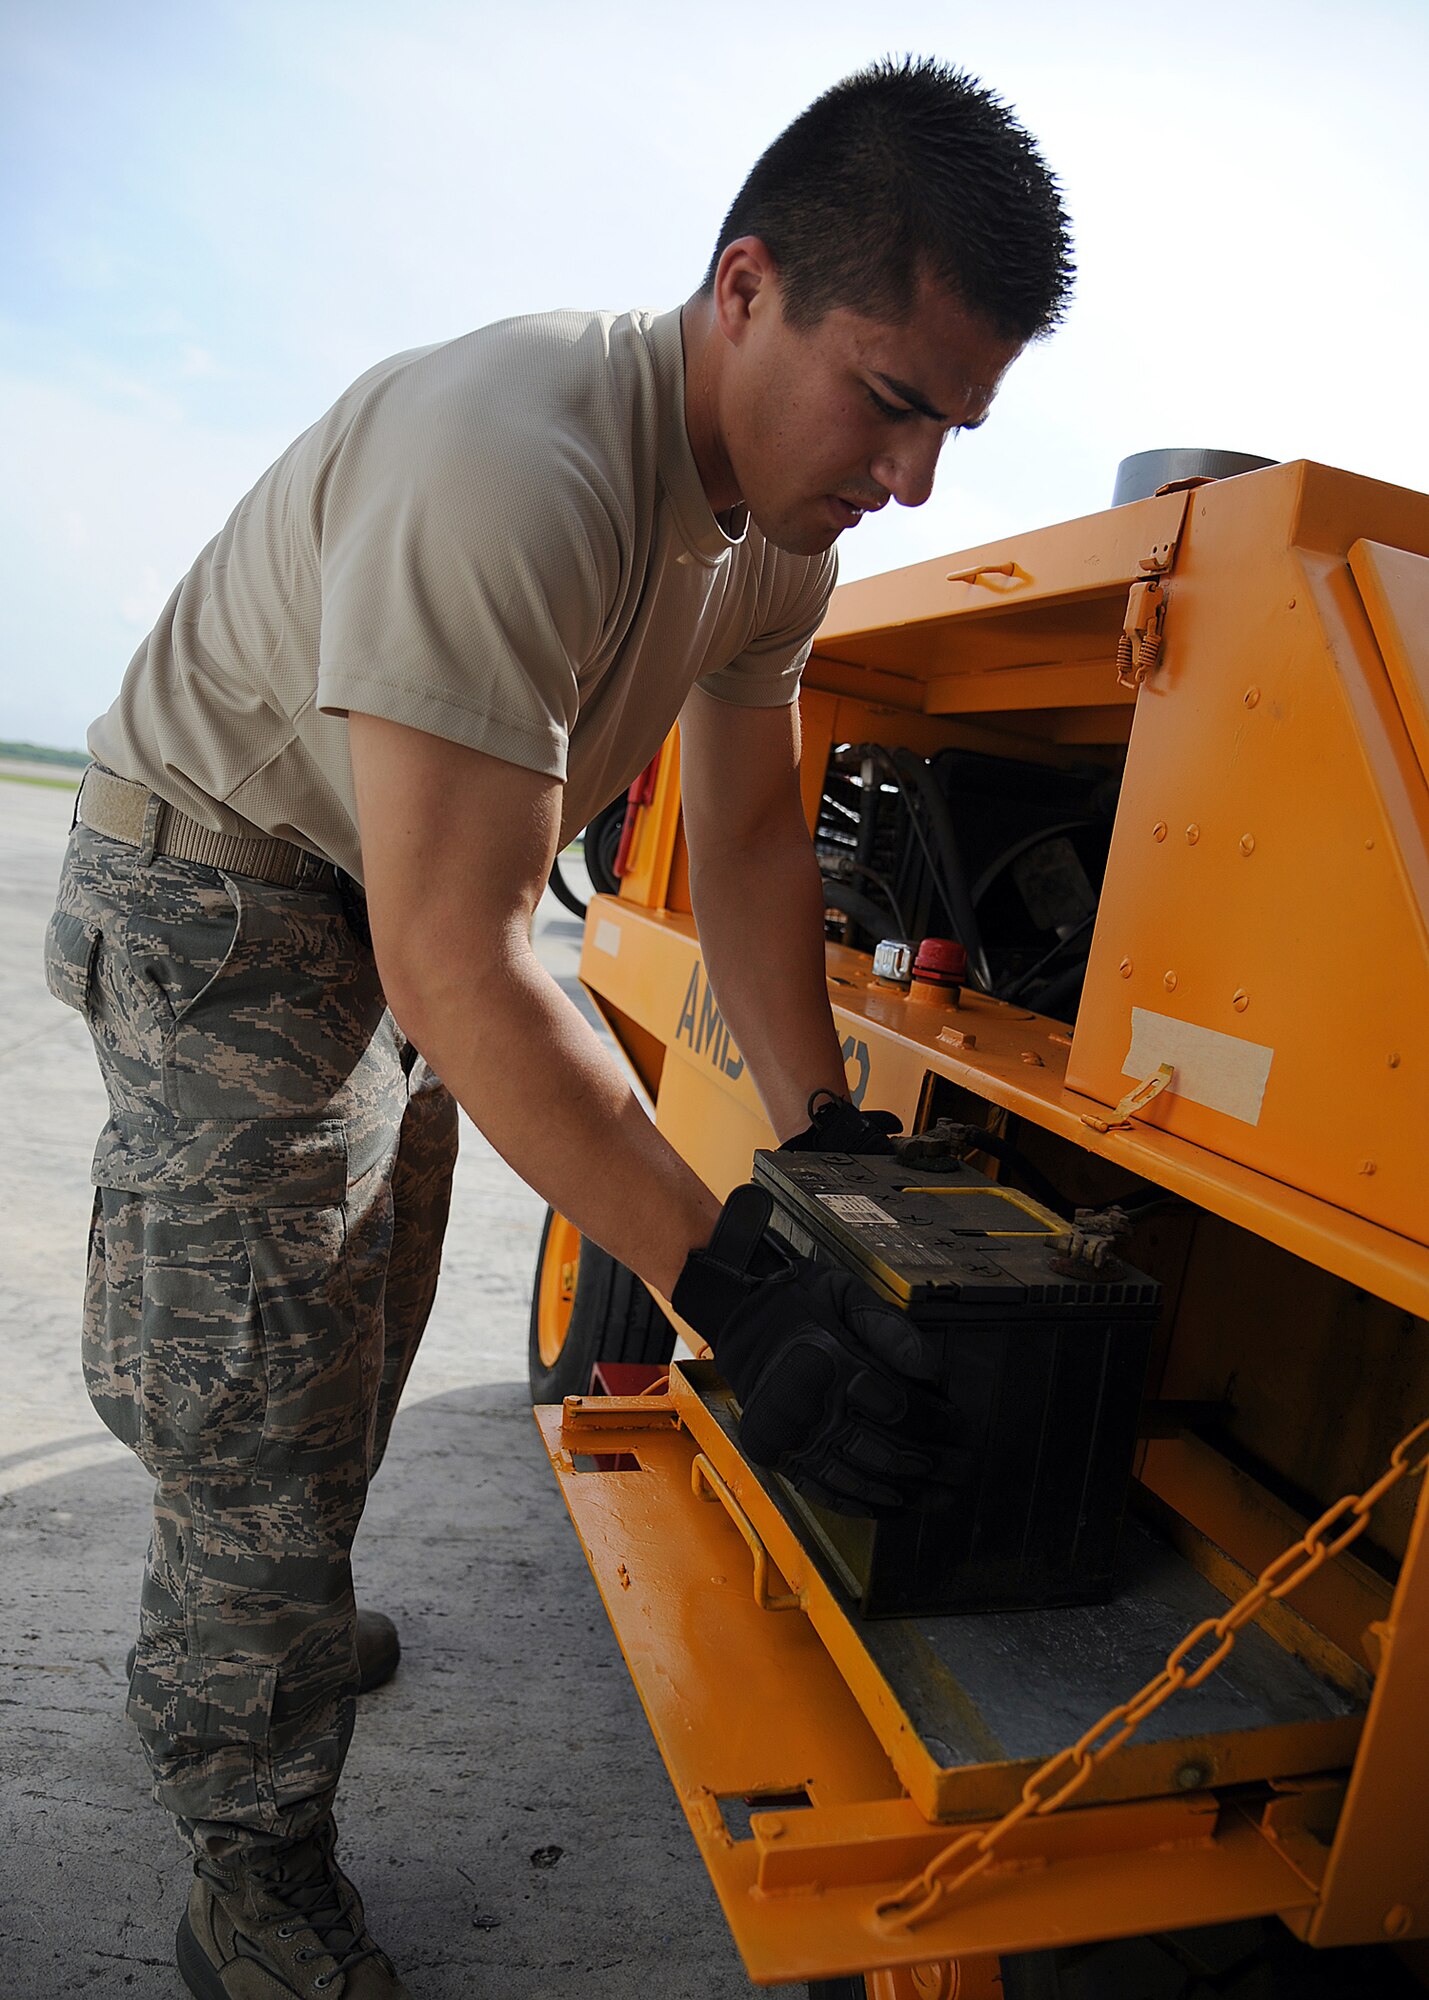 Staff Sgt. Peter Salinas, 571st Mobility Support Advisory Squadron aerial transportation air advisor, checks the battery connections on a generator before weighing and loading it onto an aircraft during an Air Mobility Command Building Partner Capacity mission at General Alberto Pauwels Rodriguez Air Base in Barranquilla, Colombia, June 27.  (U.S. Air Force photo by Tech. Sgt. Lesley Waters)